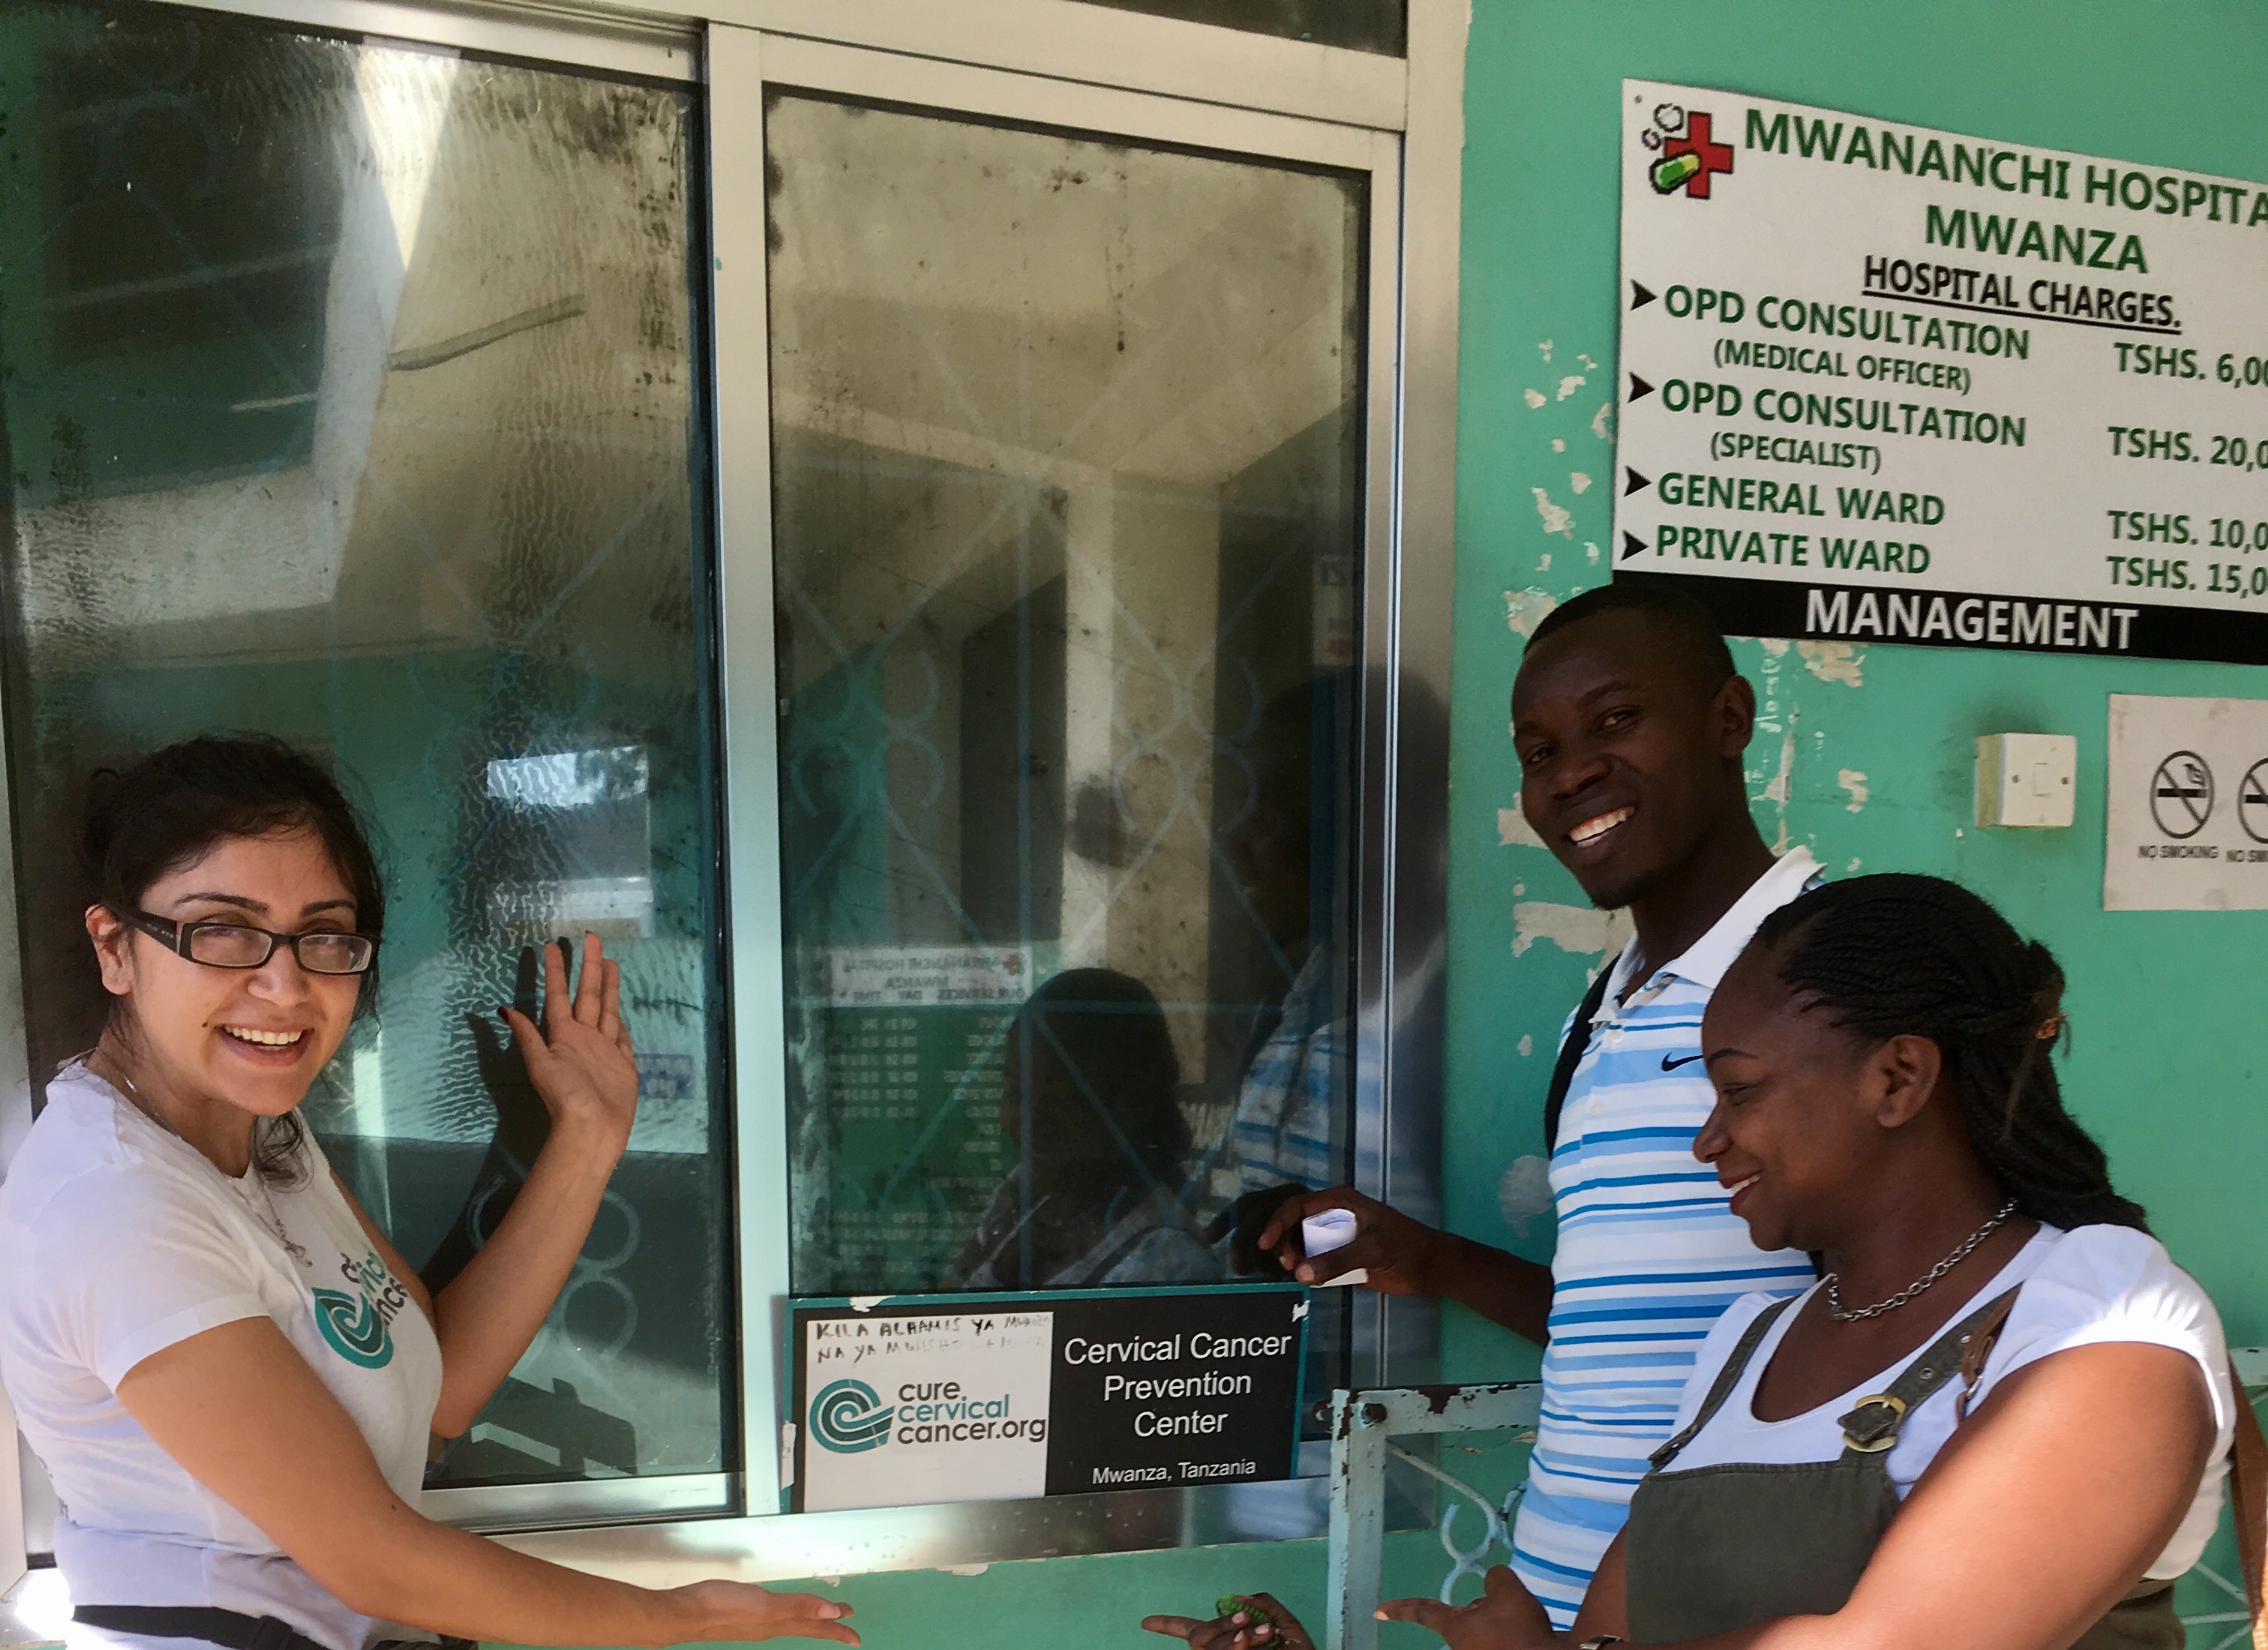  Our very own Program Coordinator Phorum Sheth standing with new CCC Global Trainee David and Matilda, our ground partner who′s currently overseeing CCC′s Cervical Cancer Prevention Program at Mwananchi Hospital in Mwanza, Tanzania.